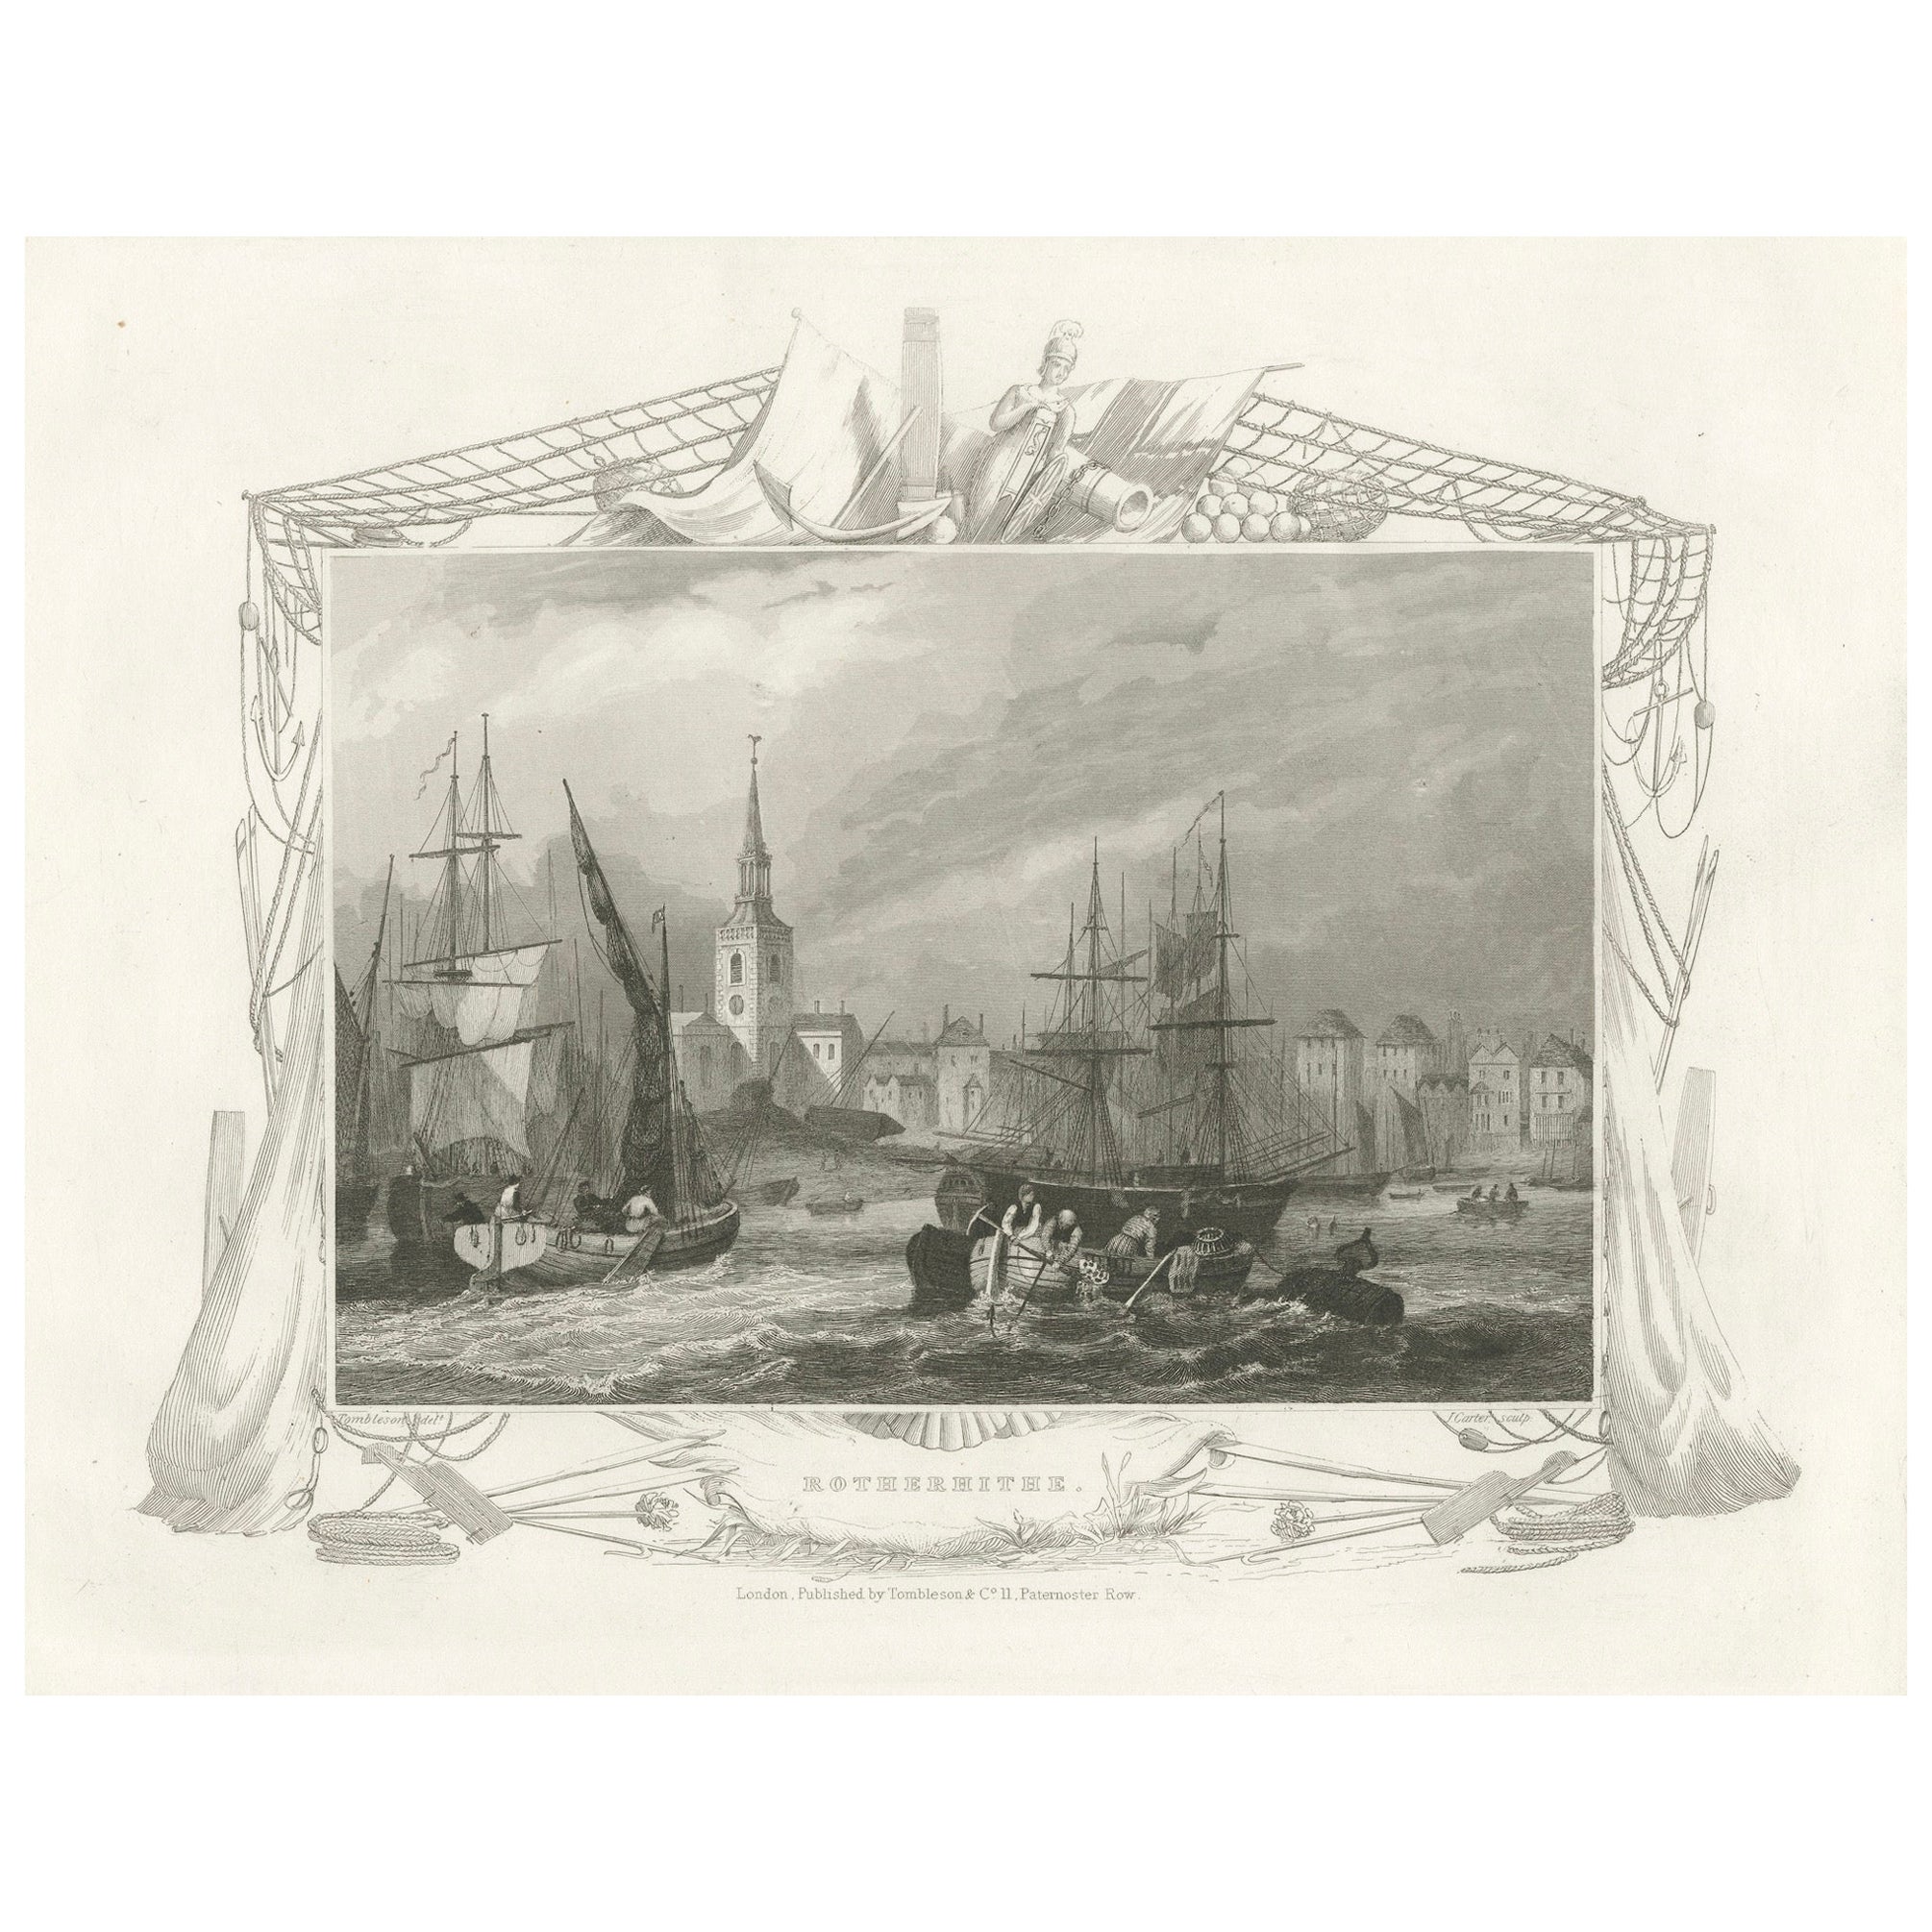 Rotherhithe's Maritime Past: Sailing Ships and St. Mary's Church Spire, 1835 For Sale